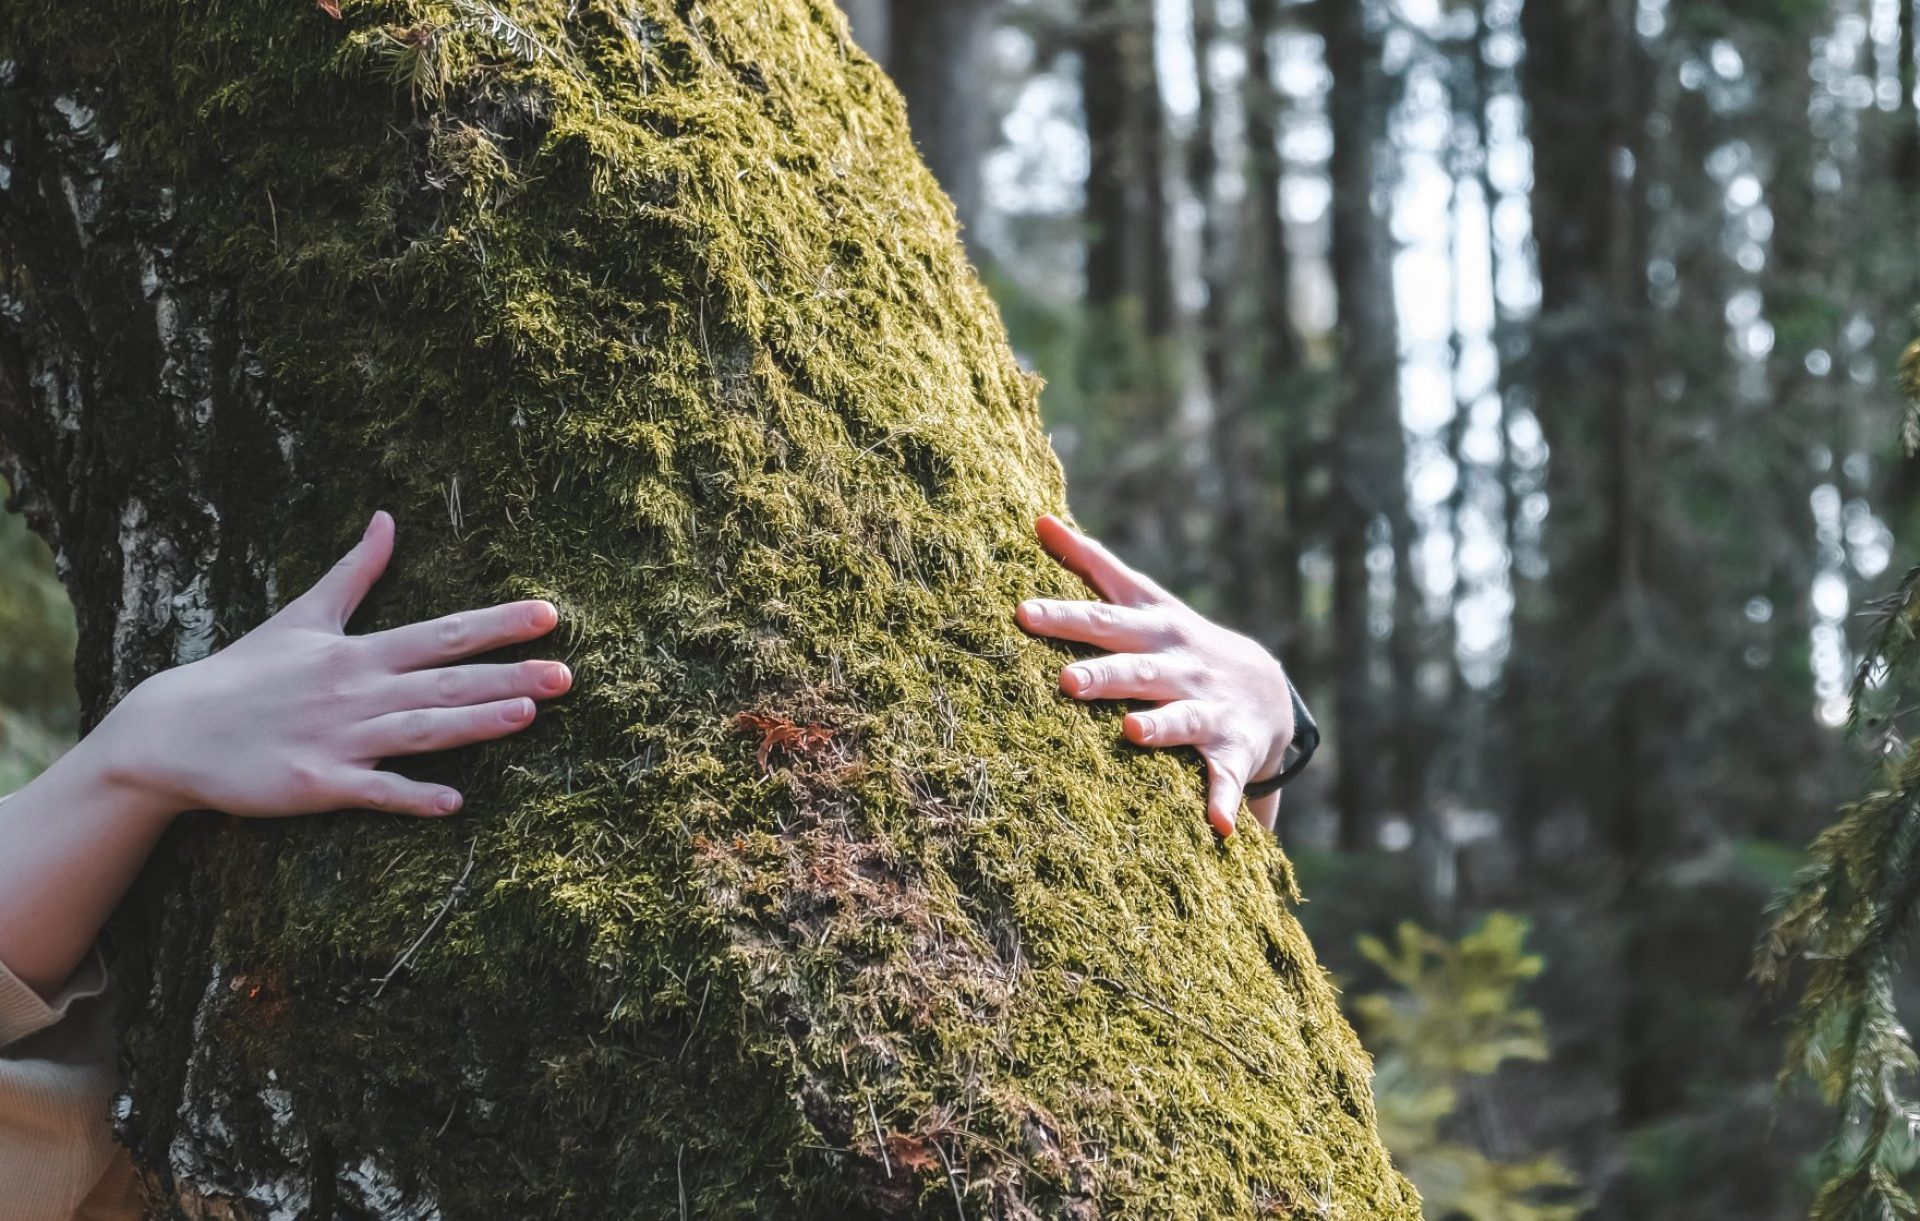 woman love nature hugging a pine tree, no deforestation concept and earth's day celebration,care for the earth, meditation,save our planet for a nice and better future - outdoor leisure activity